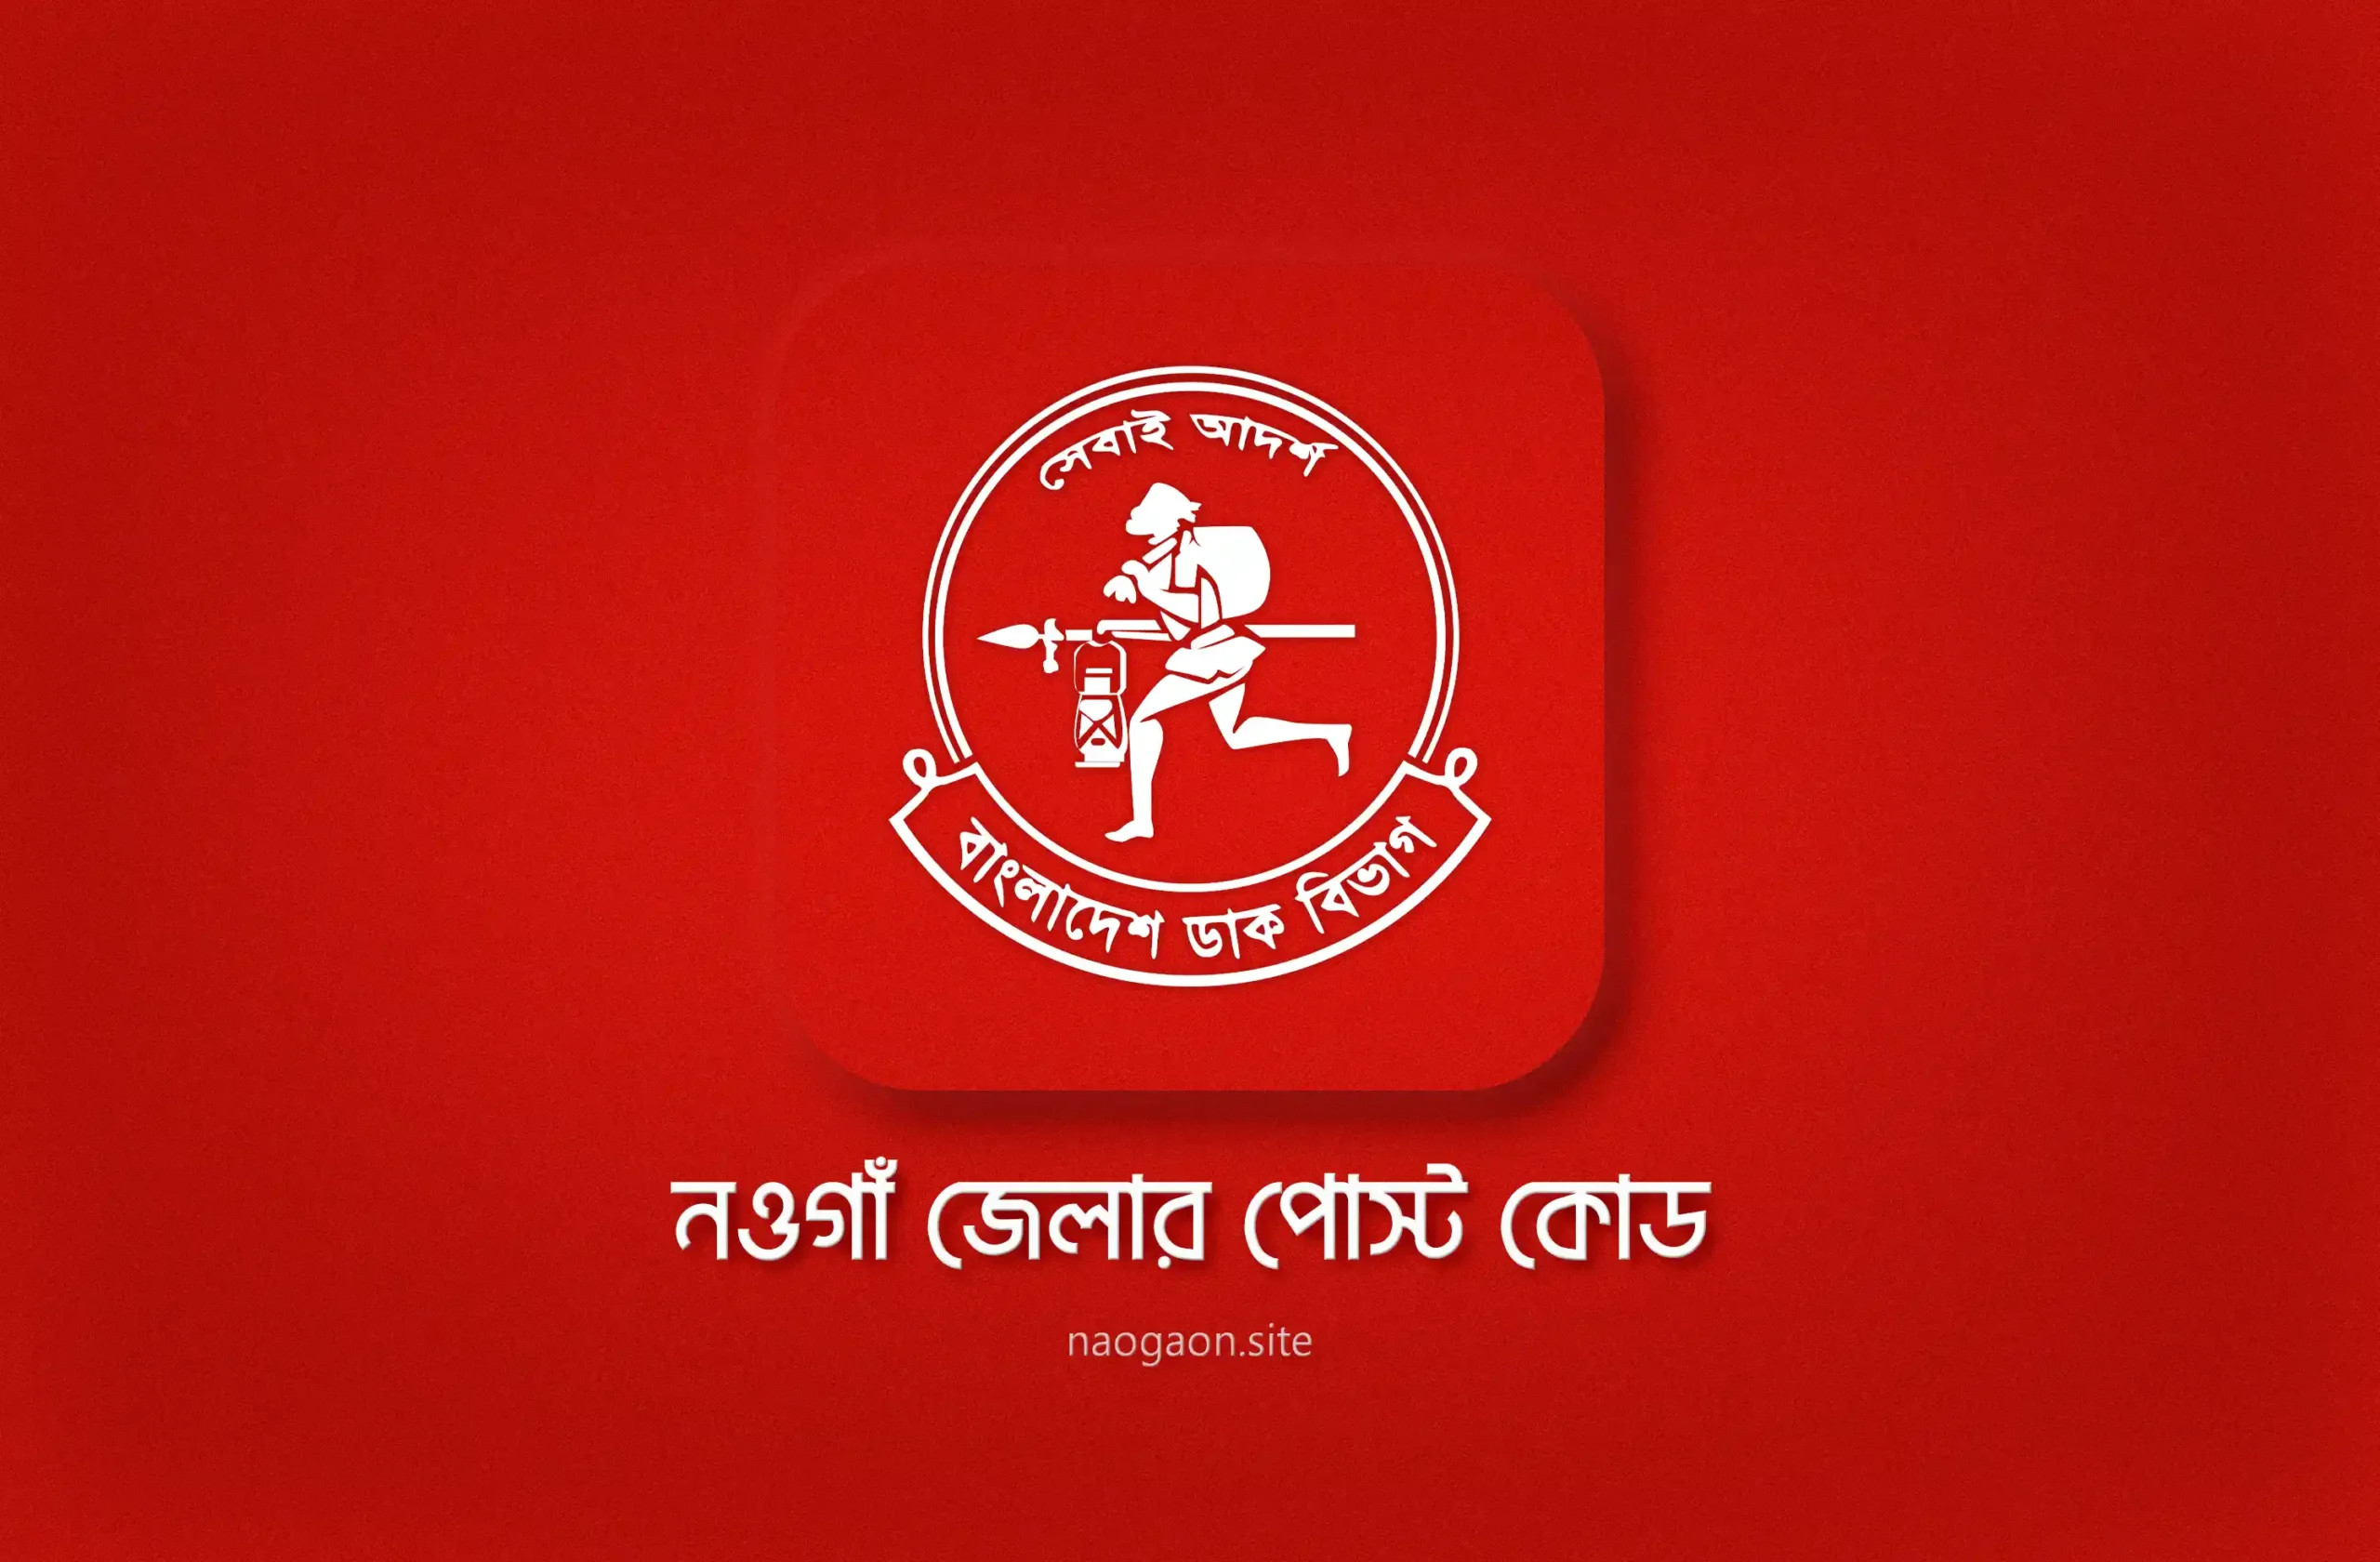 Full List of Post Codes in Naogaon District